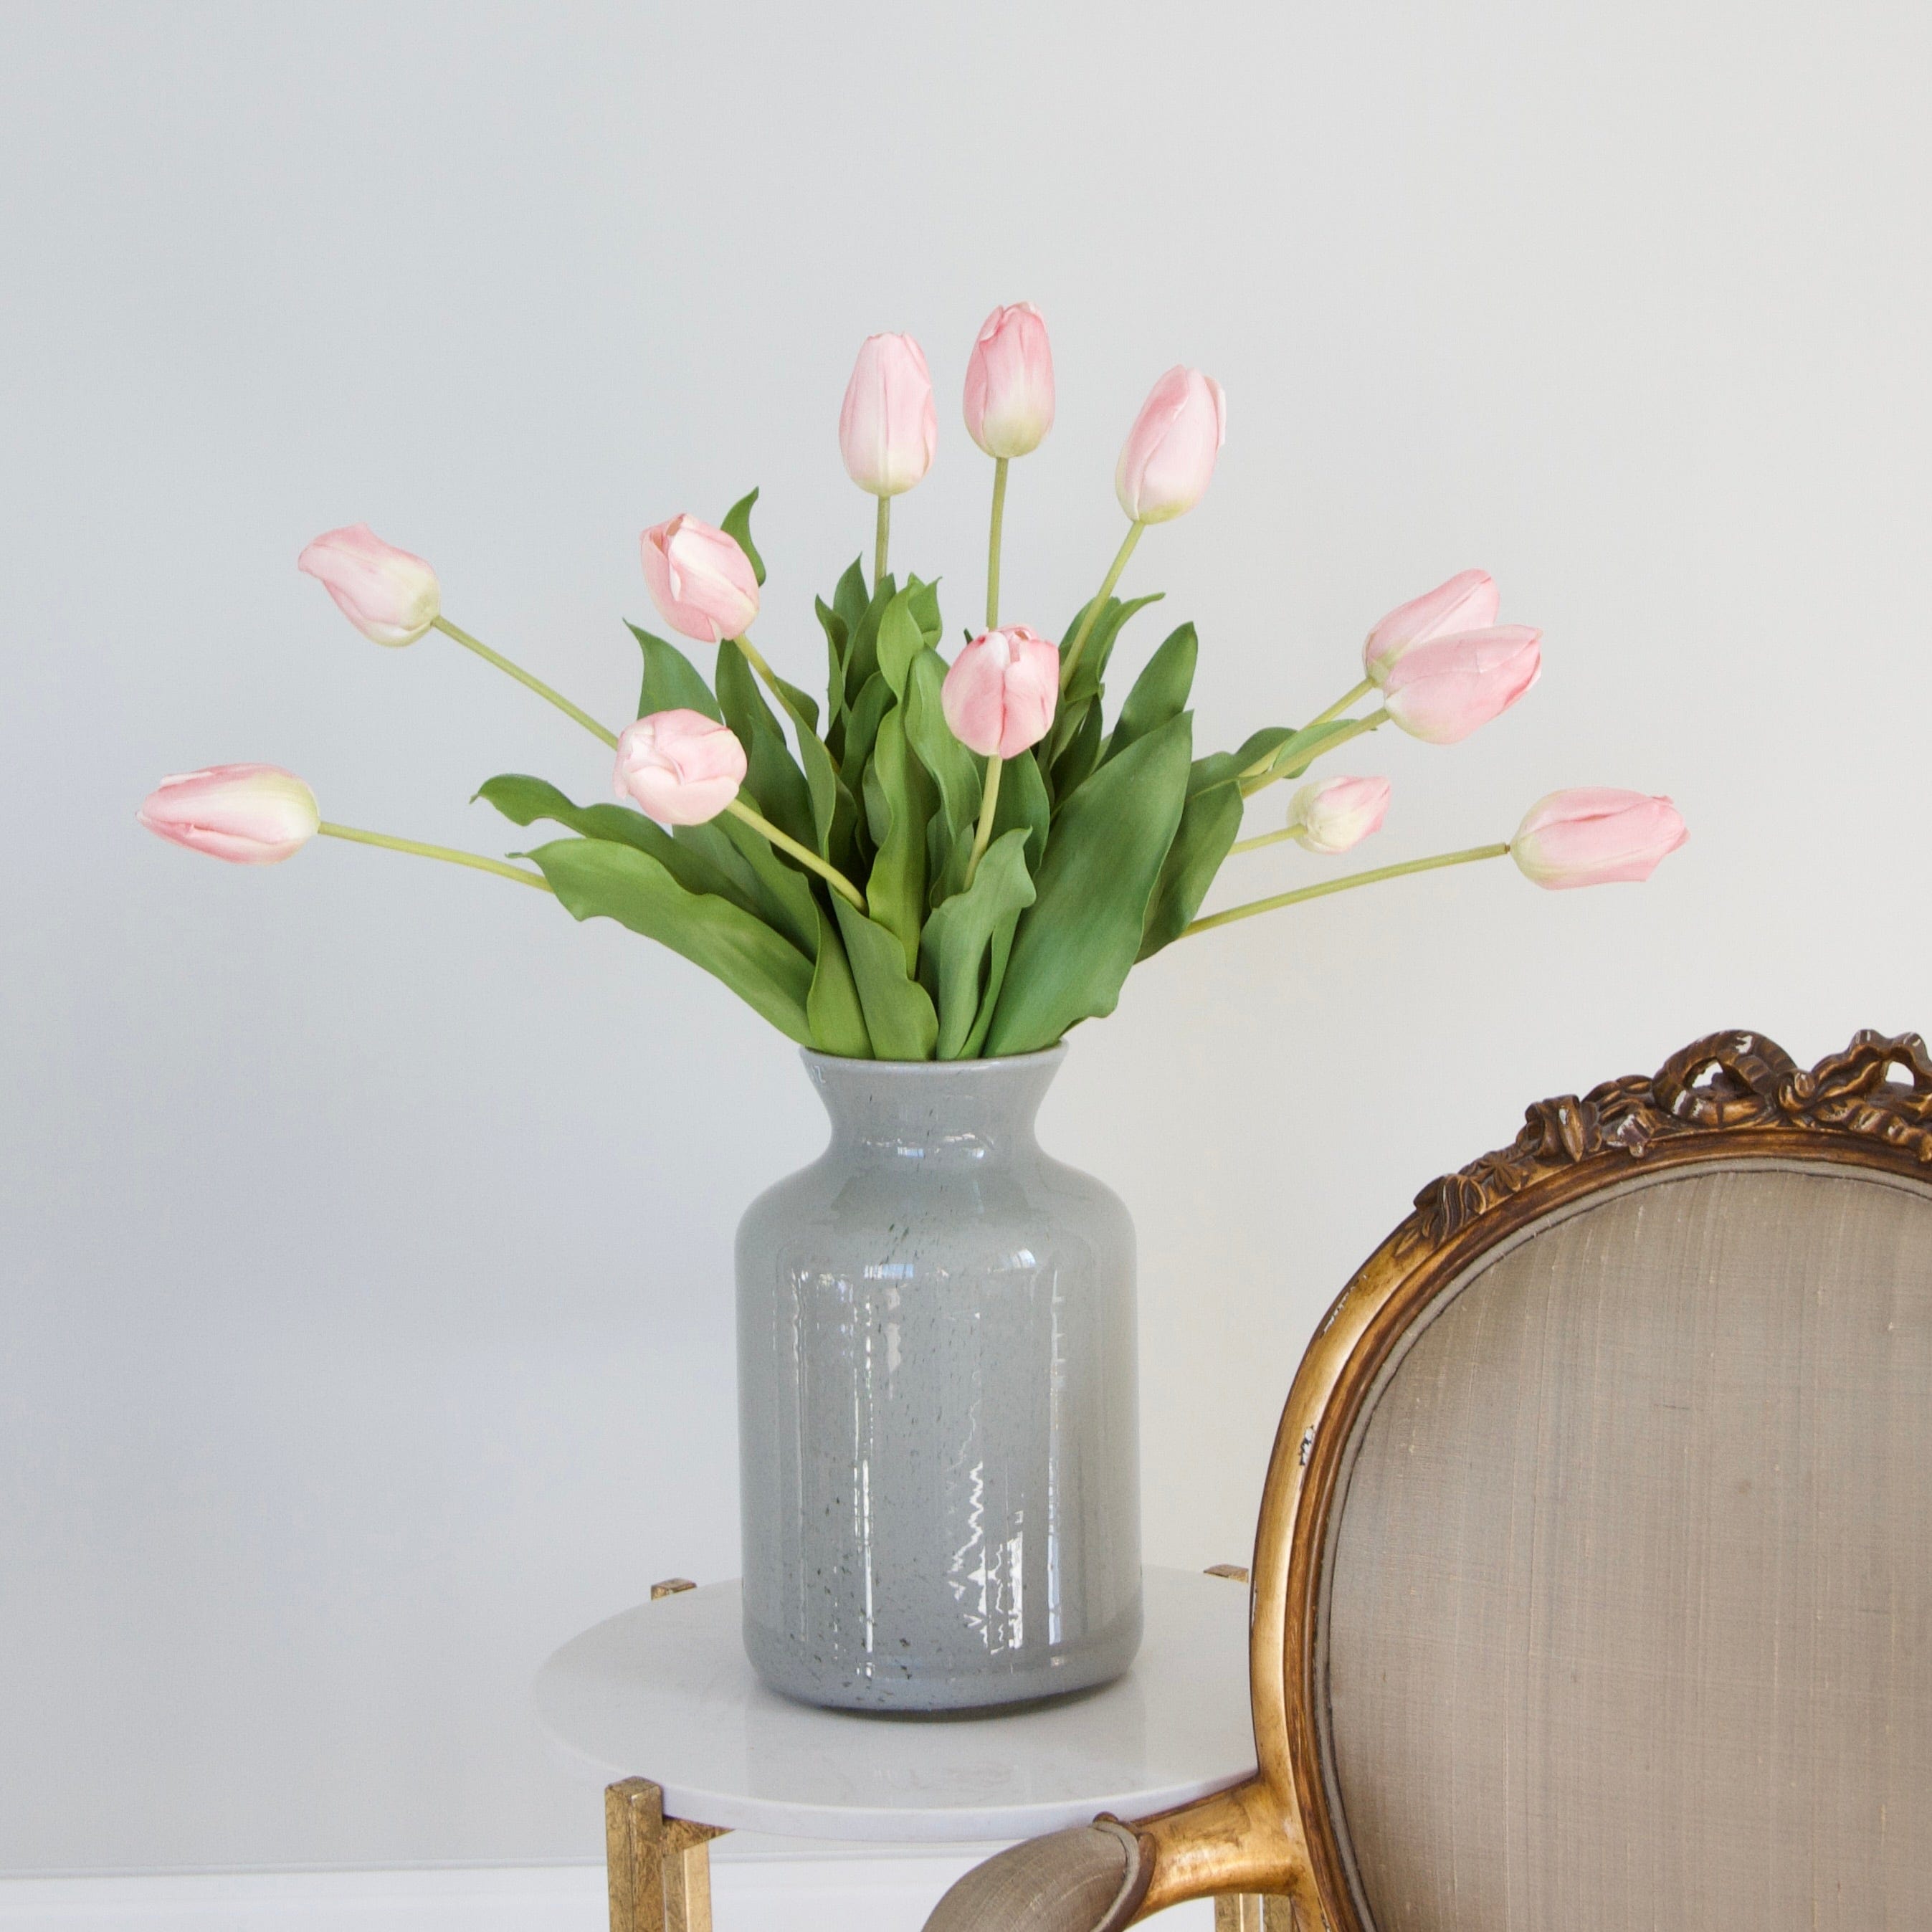 Luxury Lifelike Realistic Artificial Fabric Silk Blooms with Foliage Buy Online from The Faux Flower Company | 12 stems Pink Tulip ABY5657PK styled in Large Grey Funnel Neck Vase ABV0144